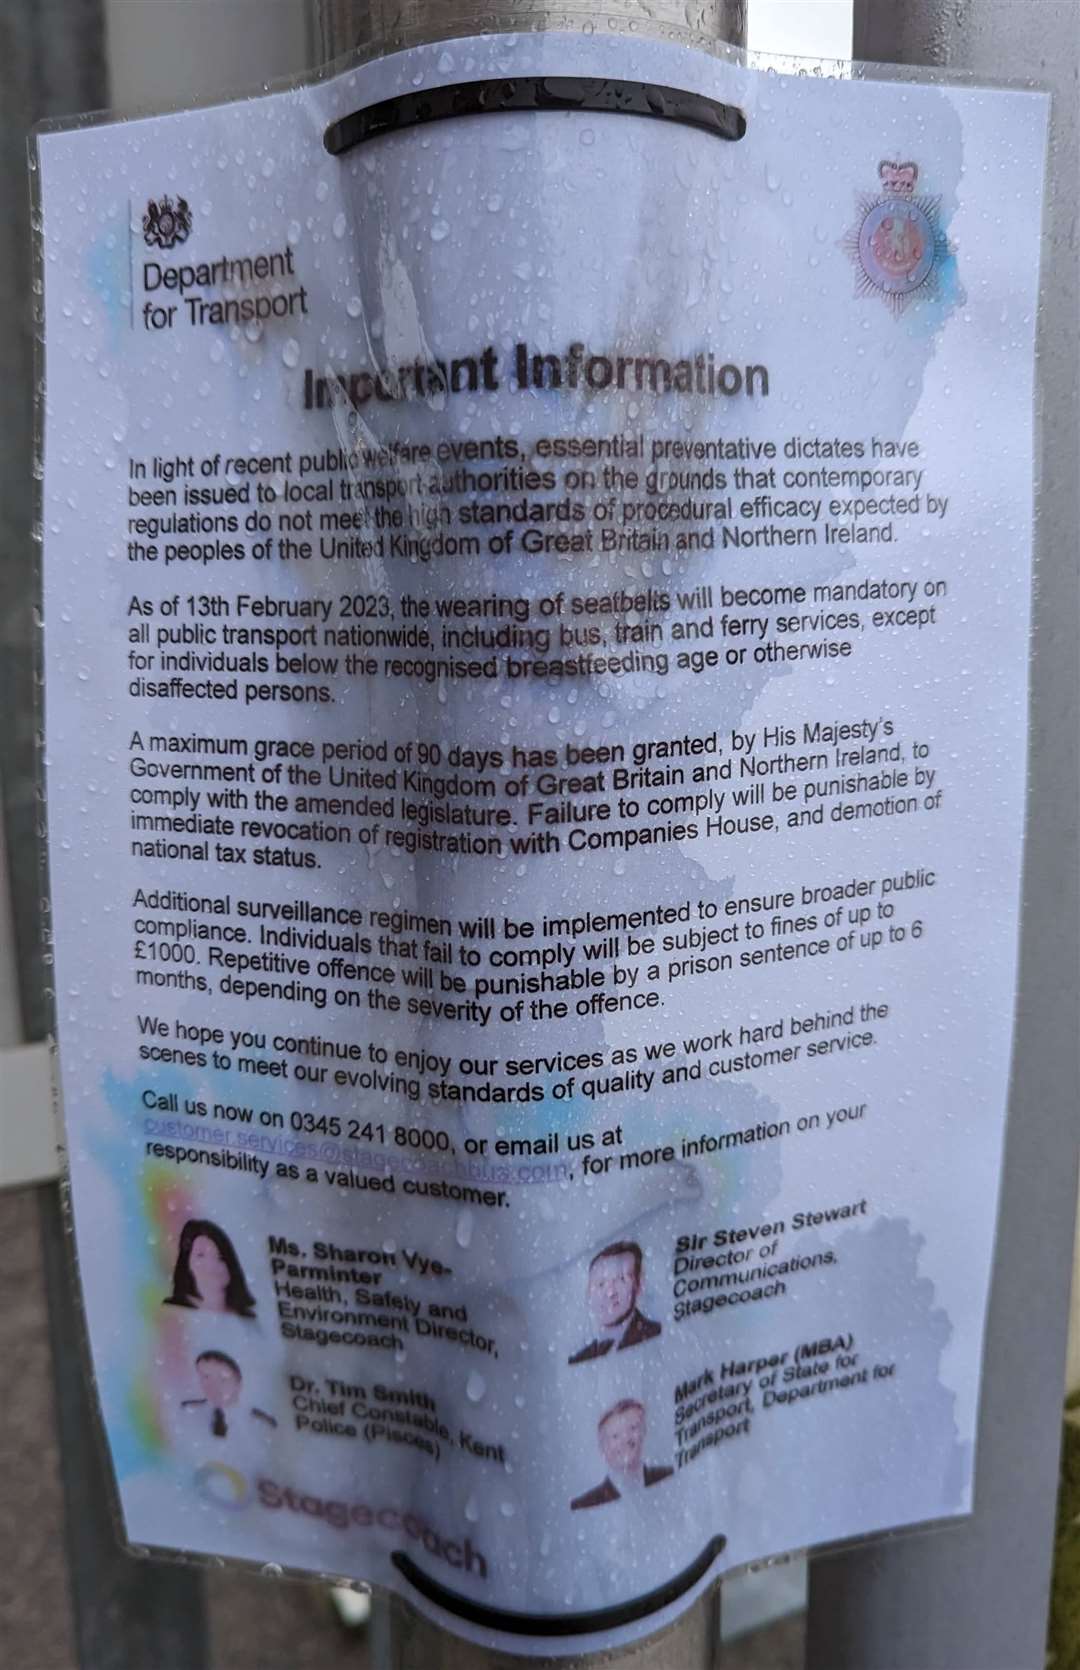 Fake notices - including this one at Folkestone West railway station - have been posted at locations across Folkestone